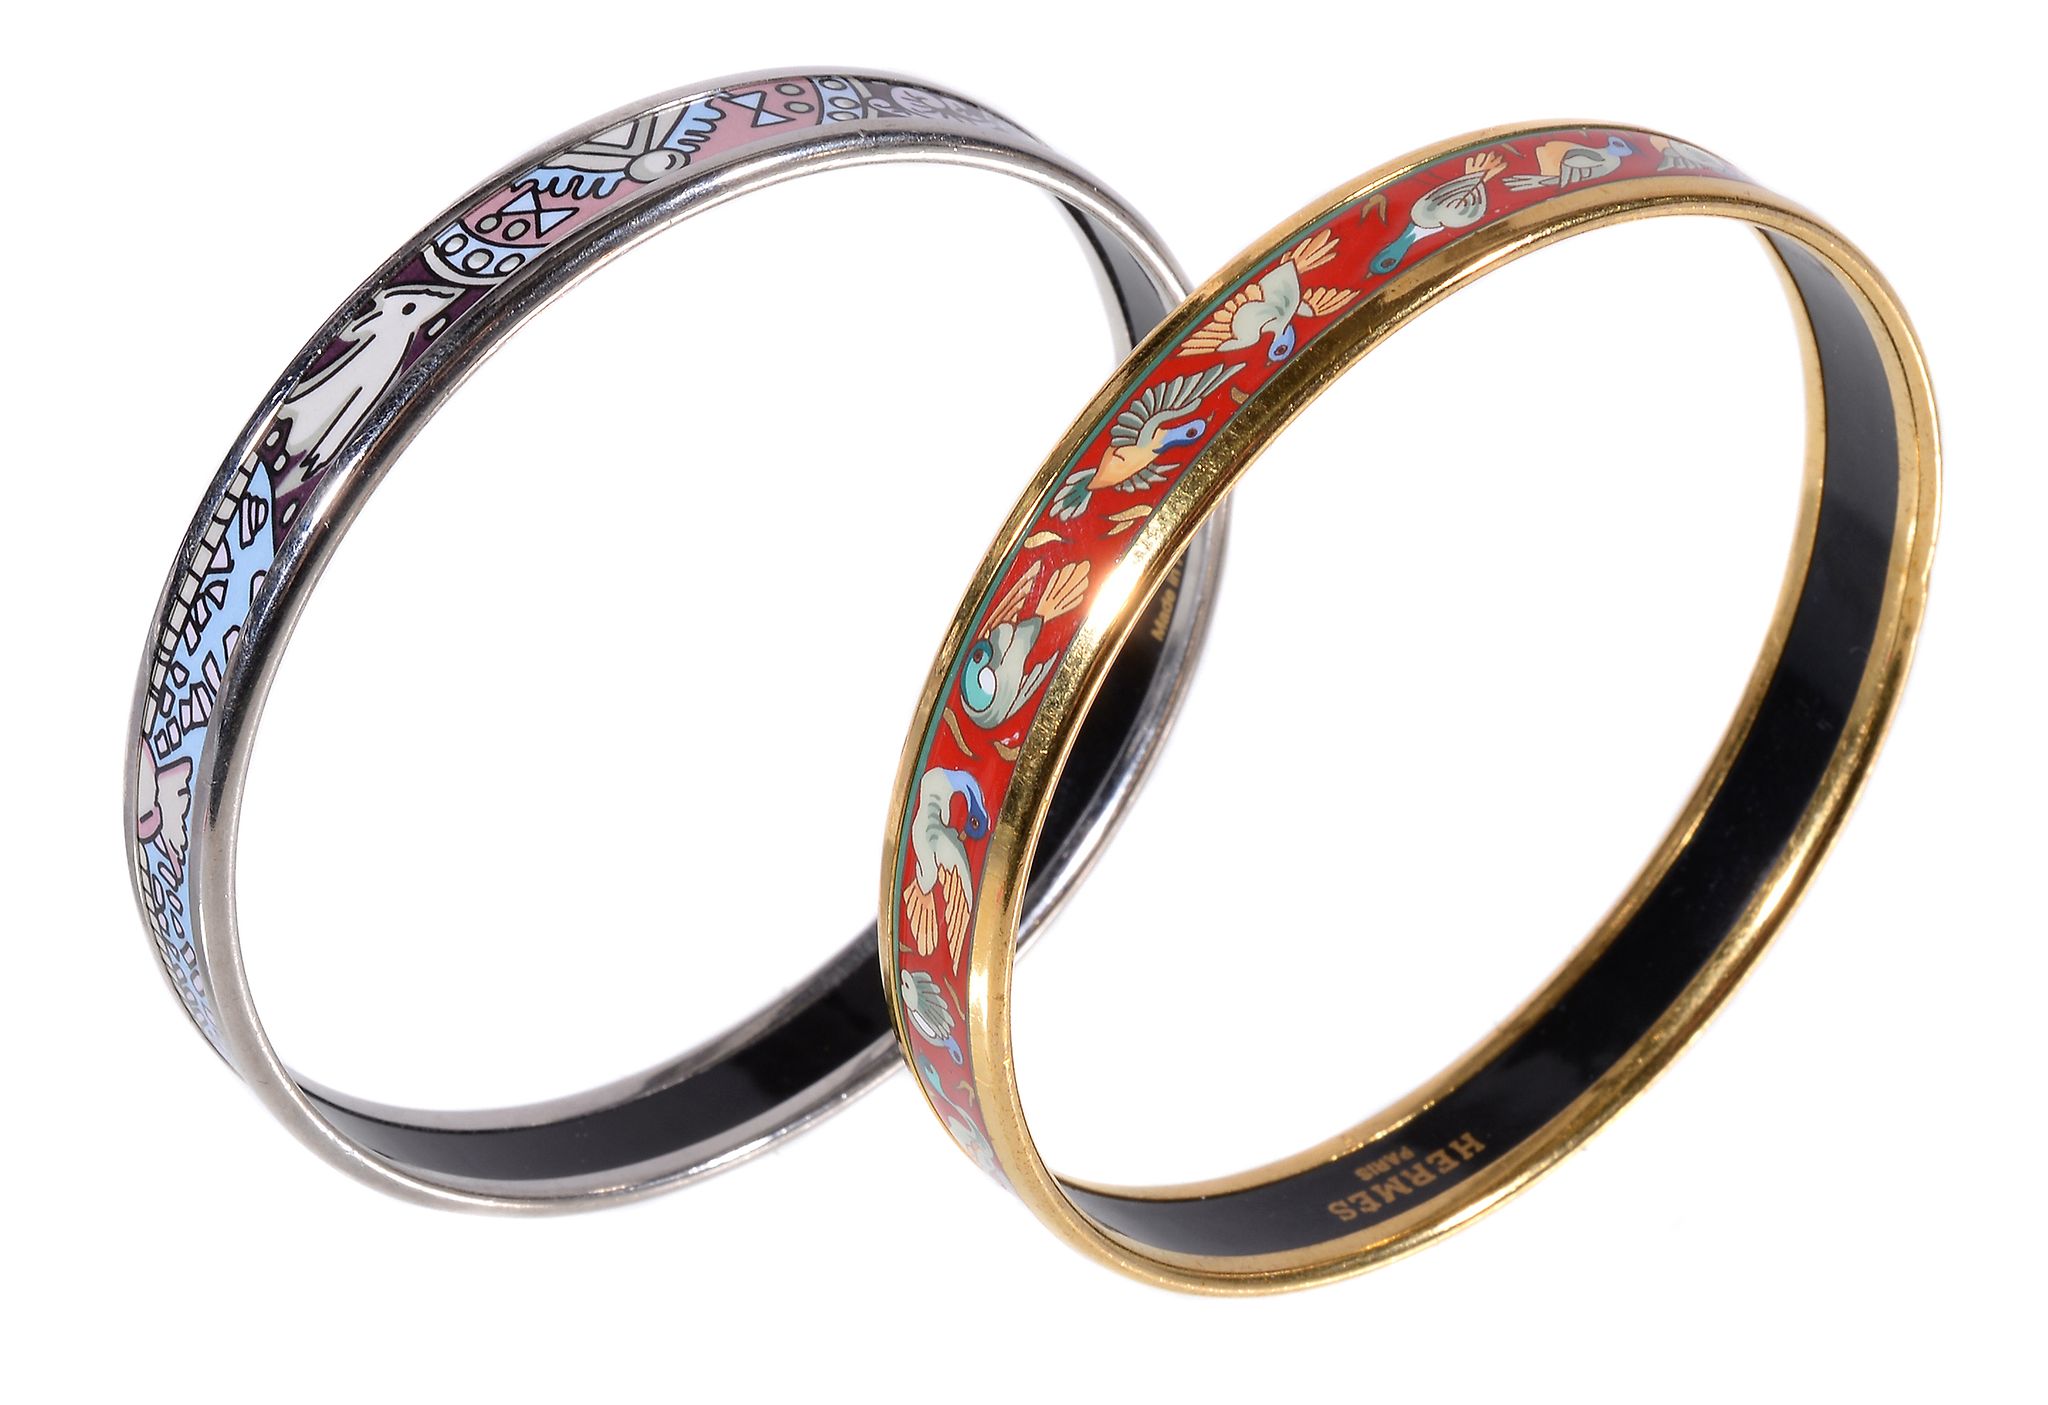 Hermes, two gilt metal and enamel bangles, ducks on a red ground and stylised artwork, each 6.5cm